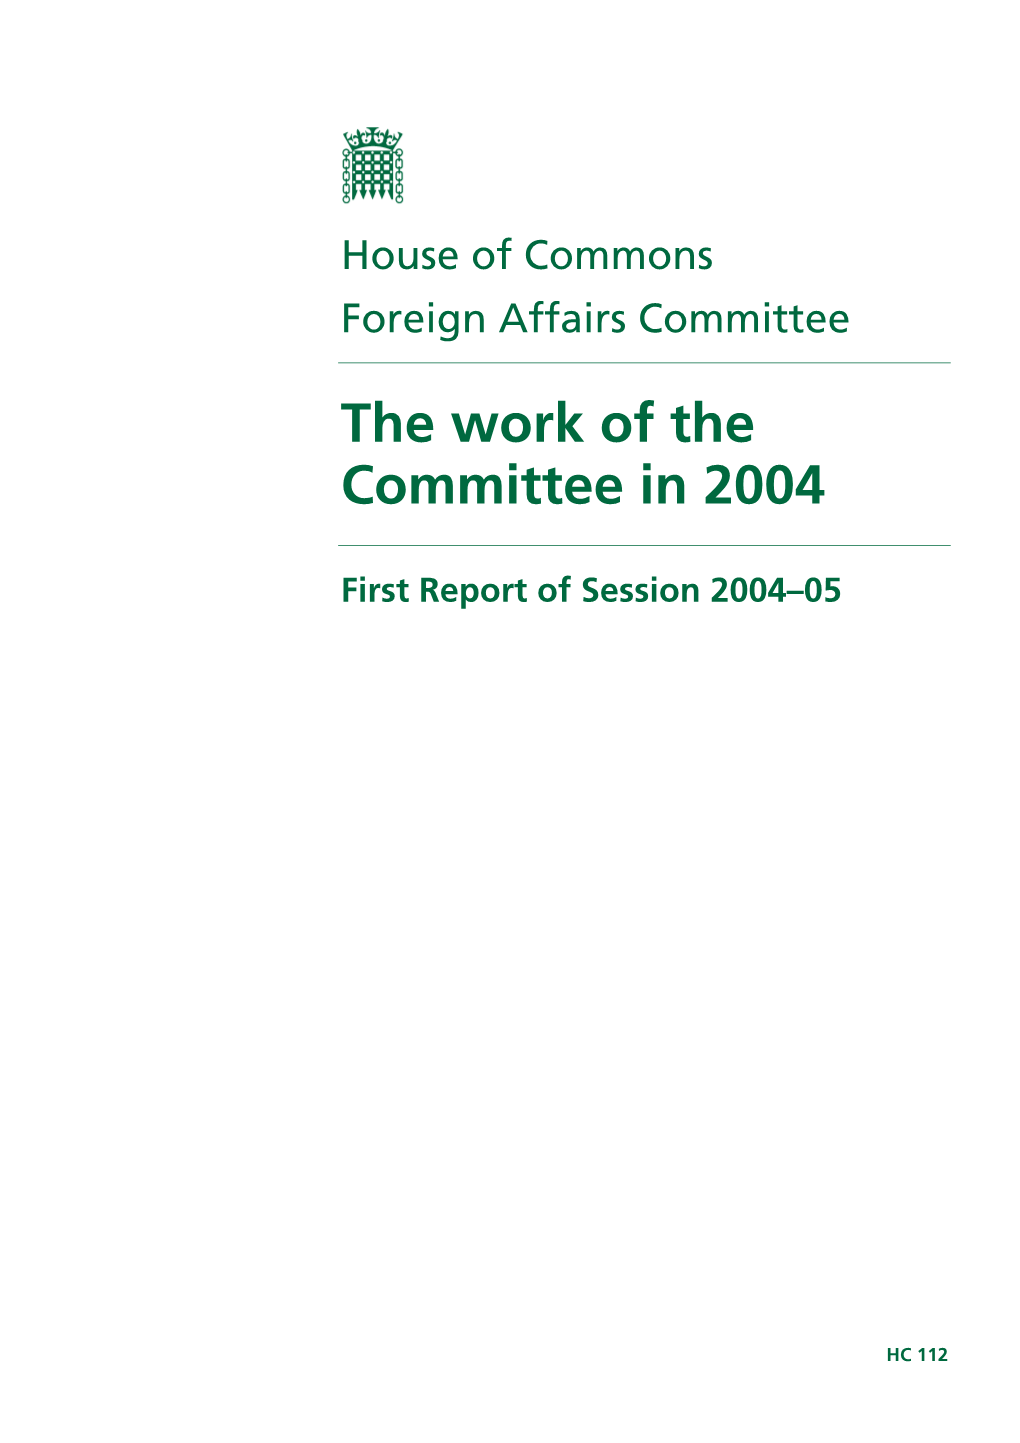 The Work of the Committee in 2004